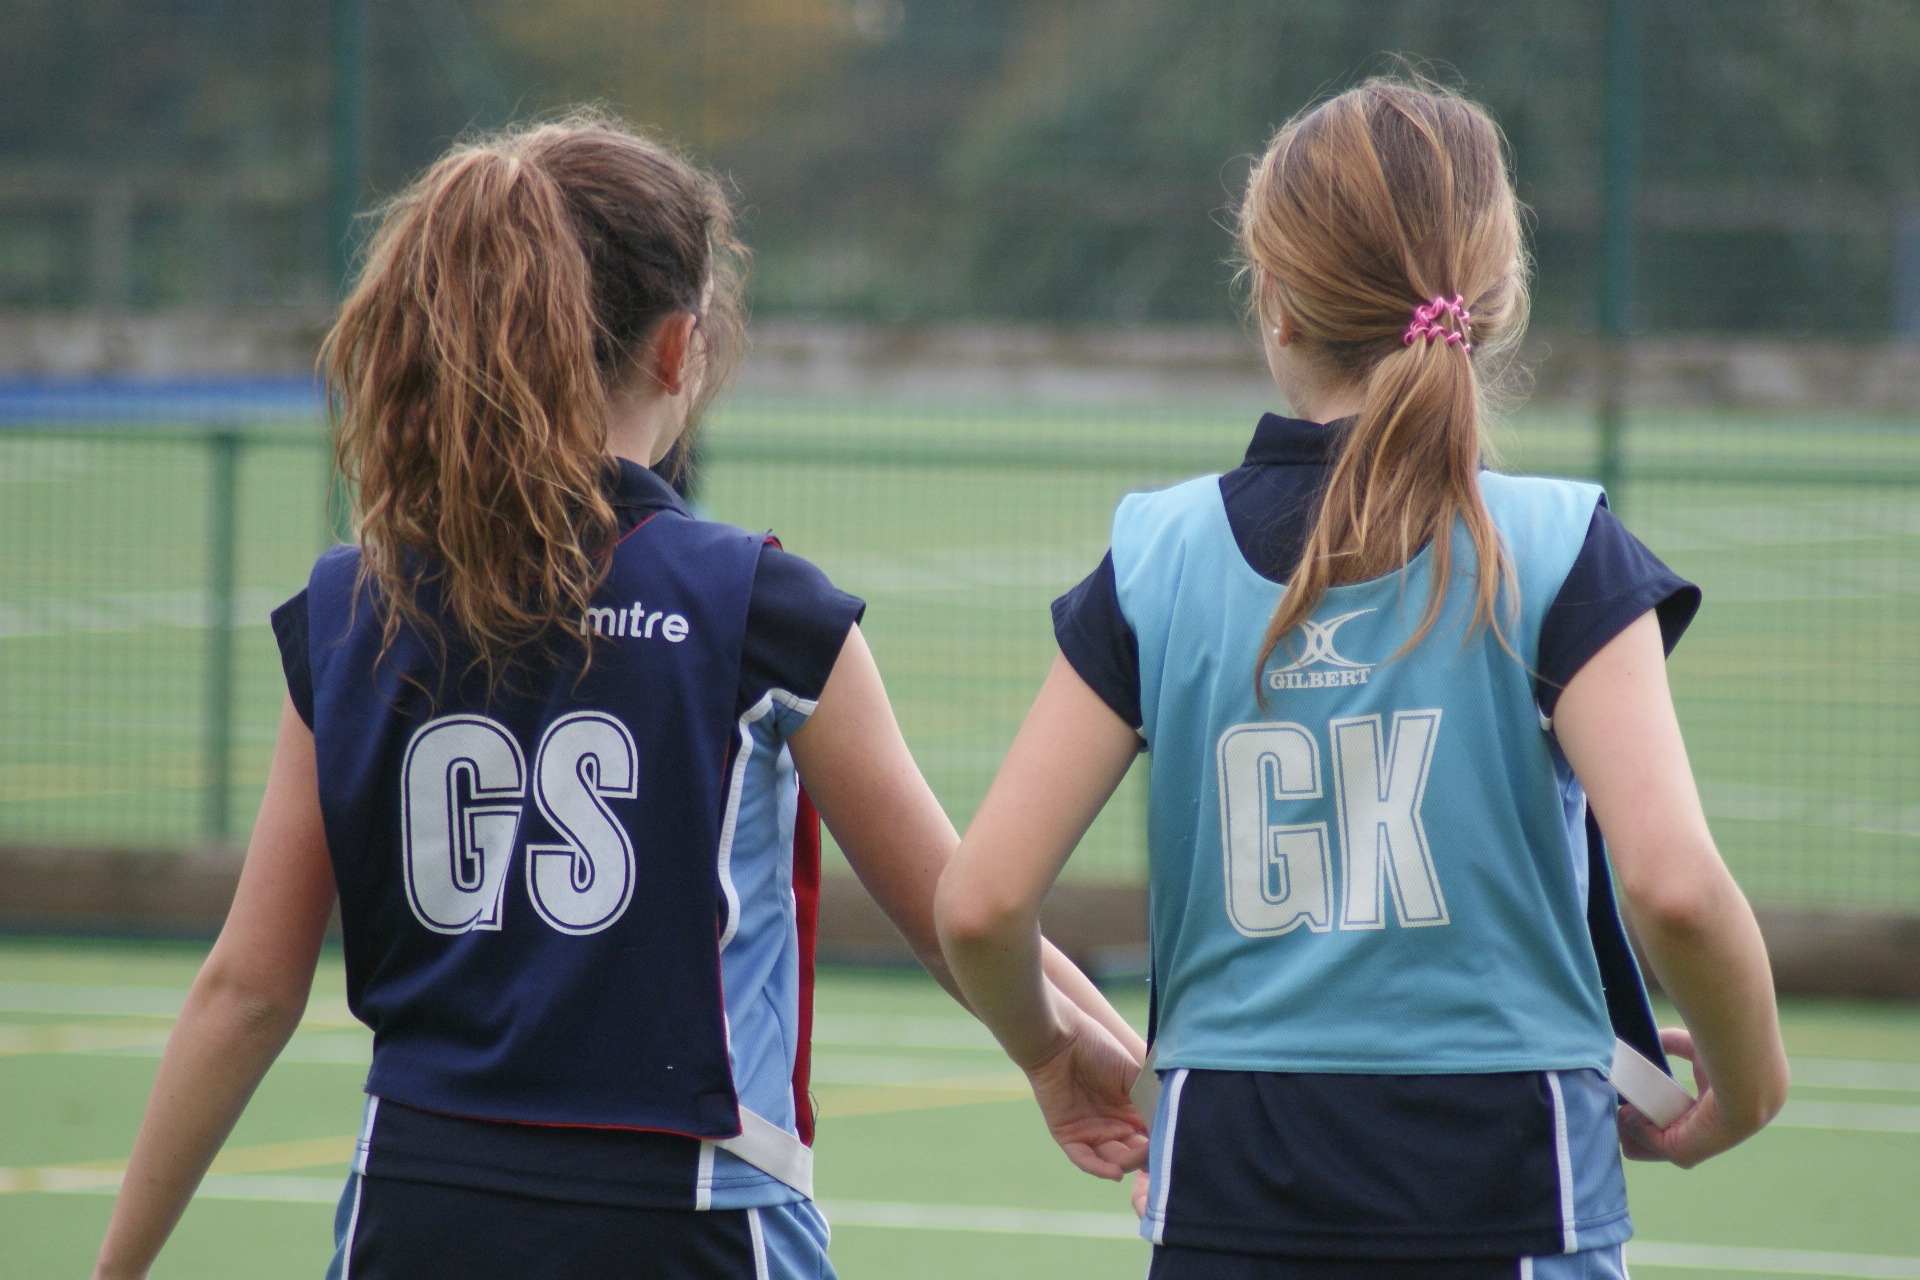 inter tutor group rugby and netball tournaments